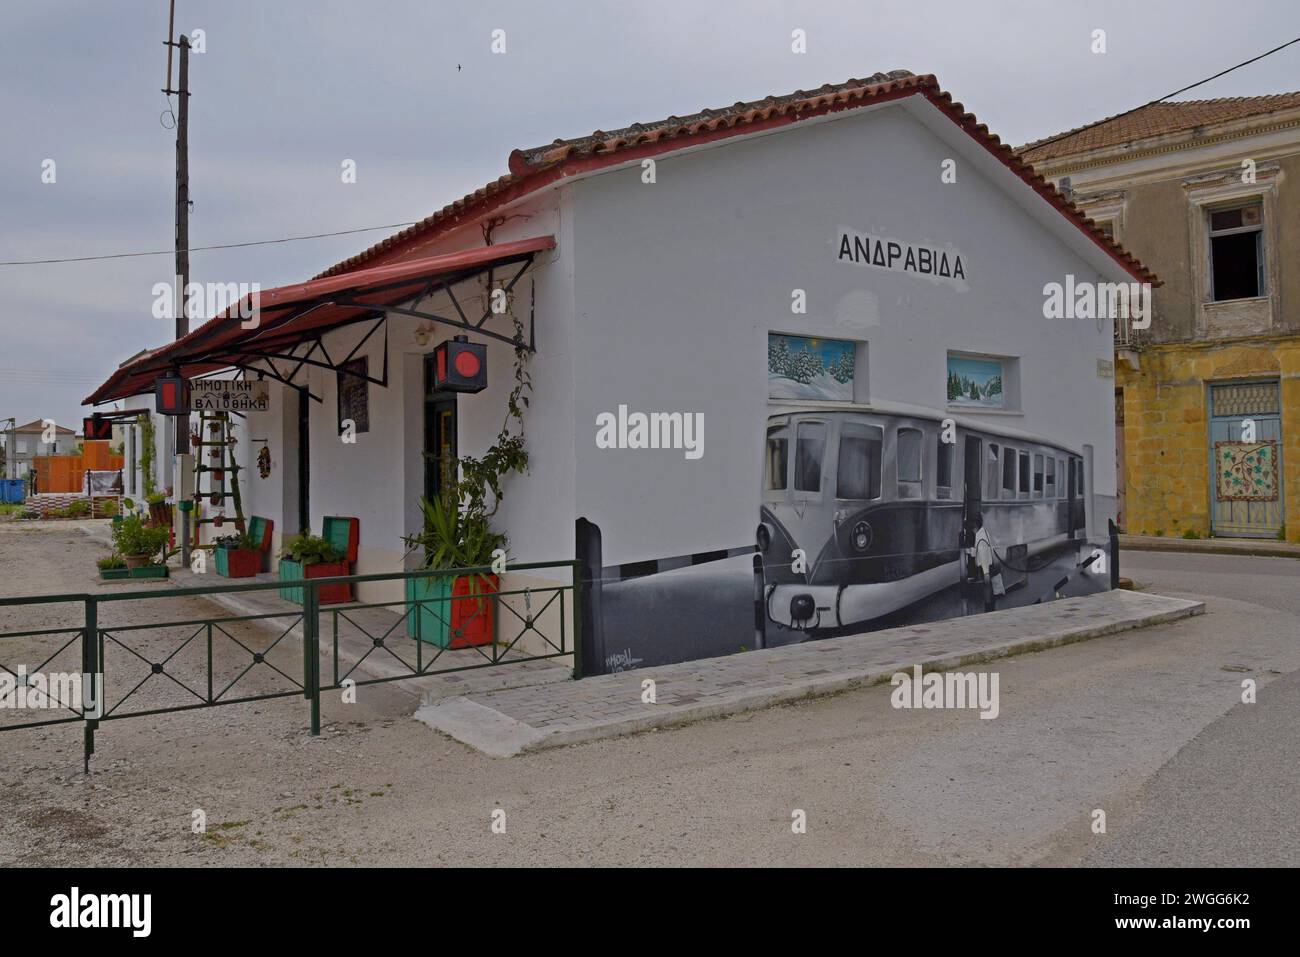 Mural on the wall of the decorated restored abandoned railway station at Andravida, Peloponnese, Greece Stock Photo